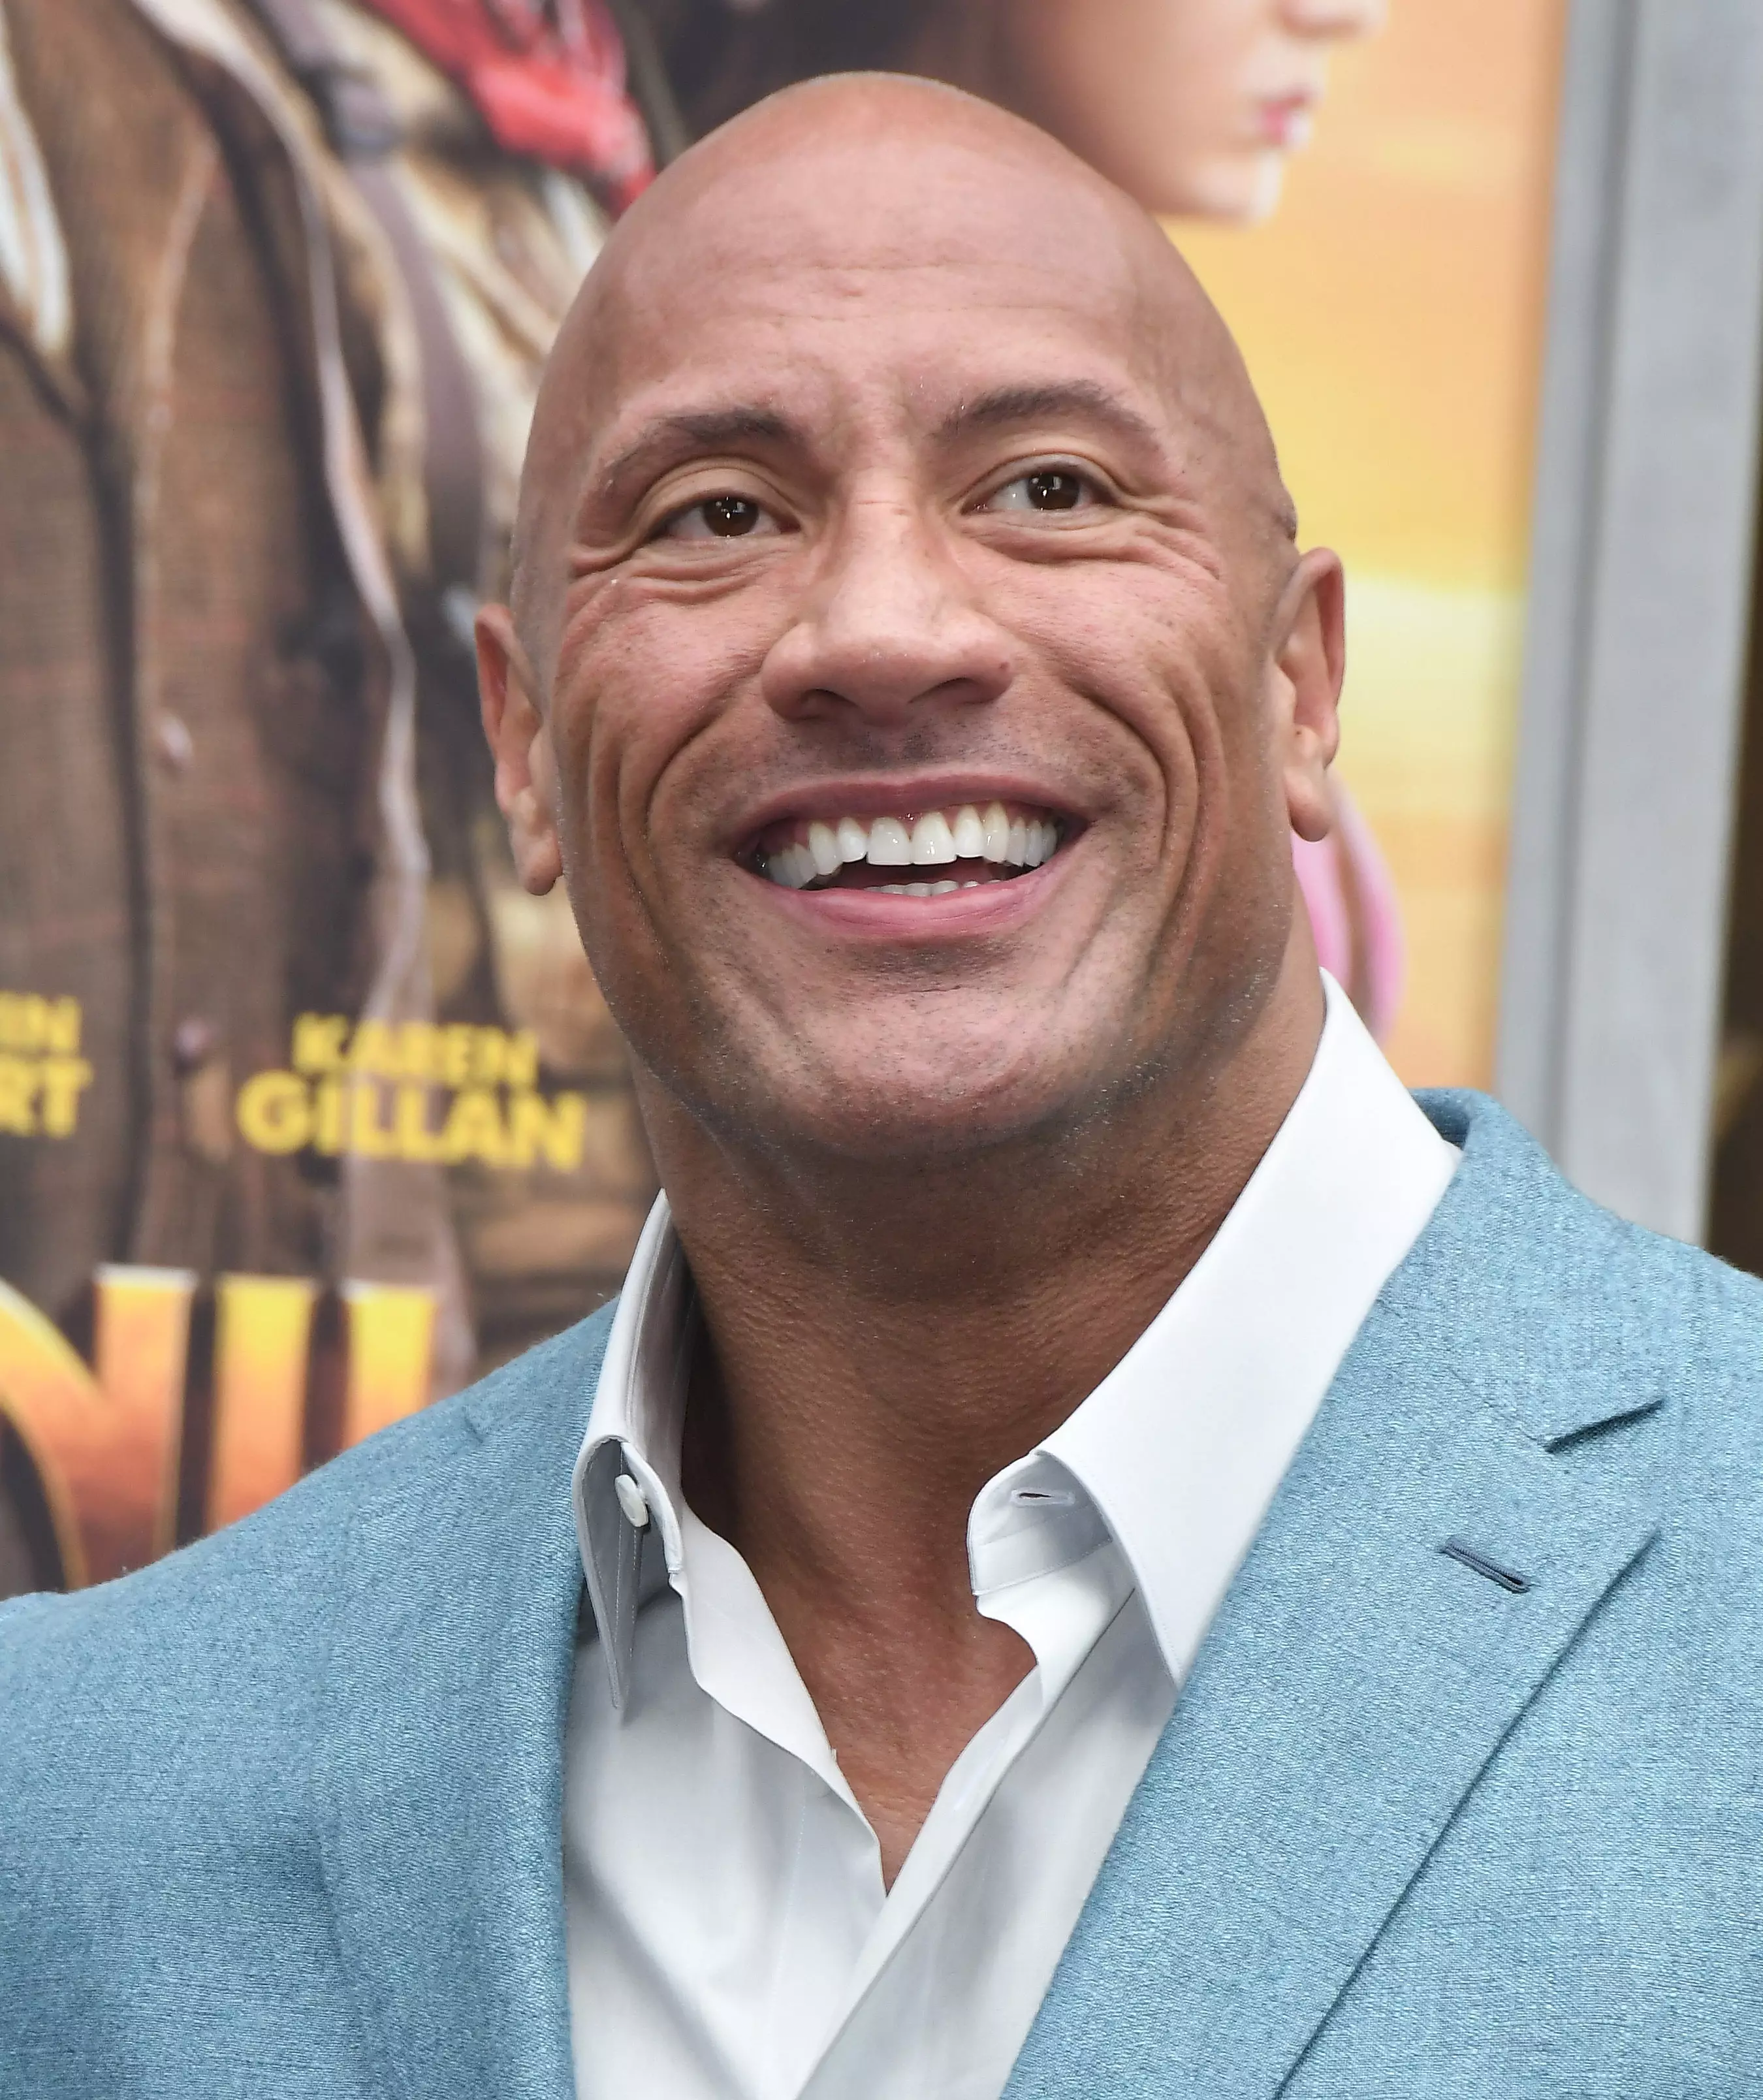 The Rock could run to become the US President.